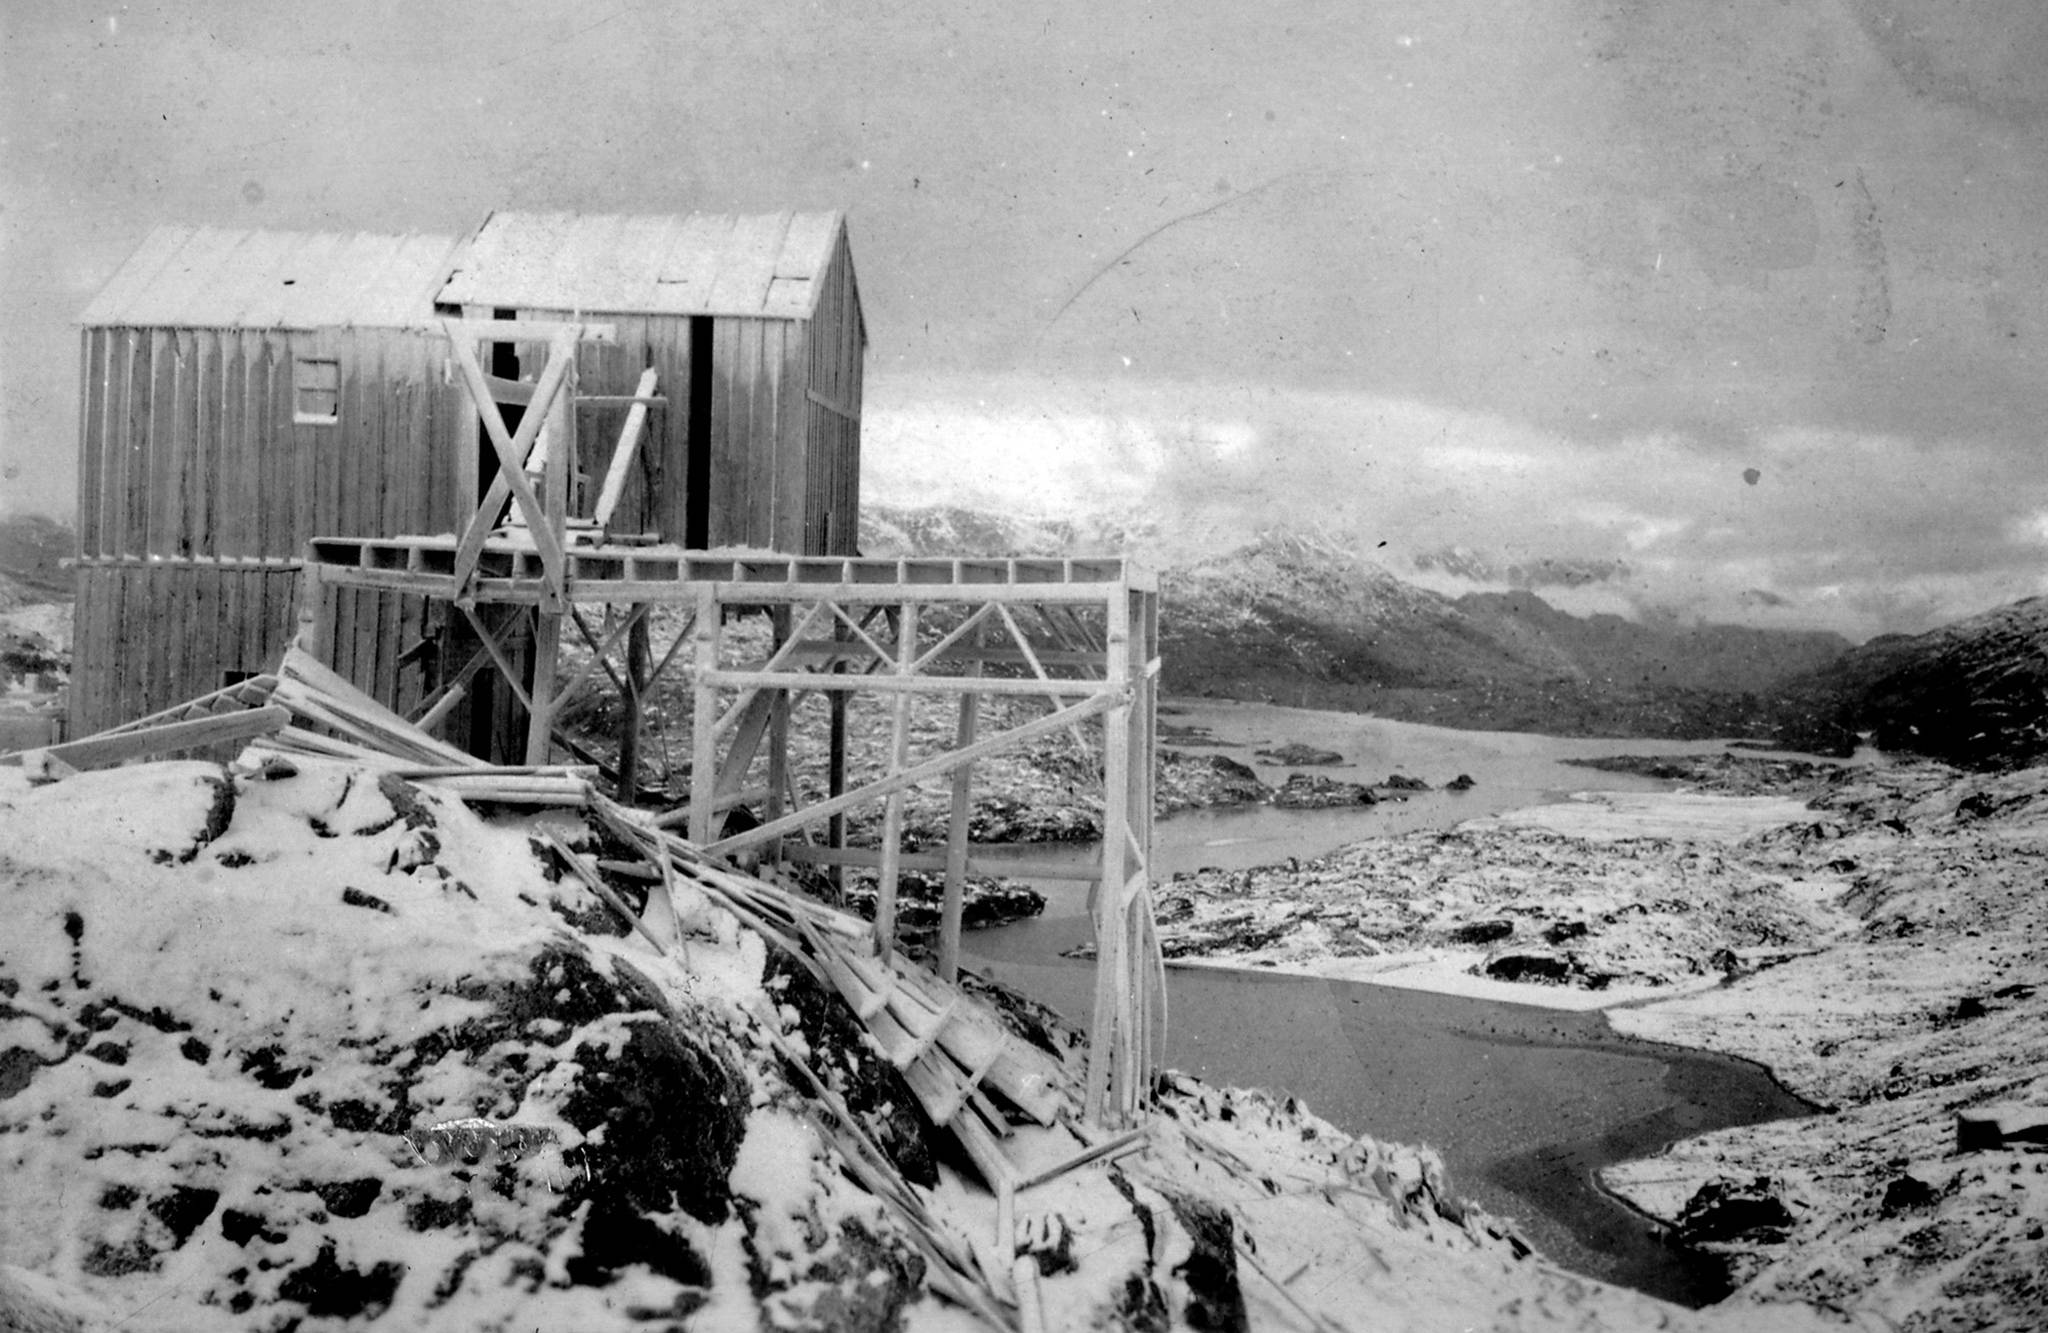 The southern elevation of the northern terminal station of the Alaska Railroad & Transportation Company’s aerial tramway operation. Photo taken in the fall of 1922 near the summit of the Chilkoot Trail looking northwest into Canada. (Image courtesy of the National Park Service, Klondike Gold Rush National Historical Park, George & Edna Rapuzzi Collection)